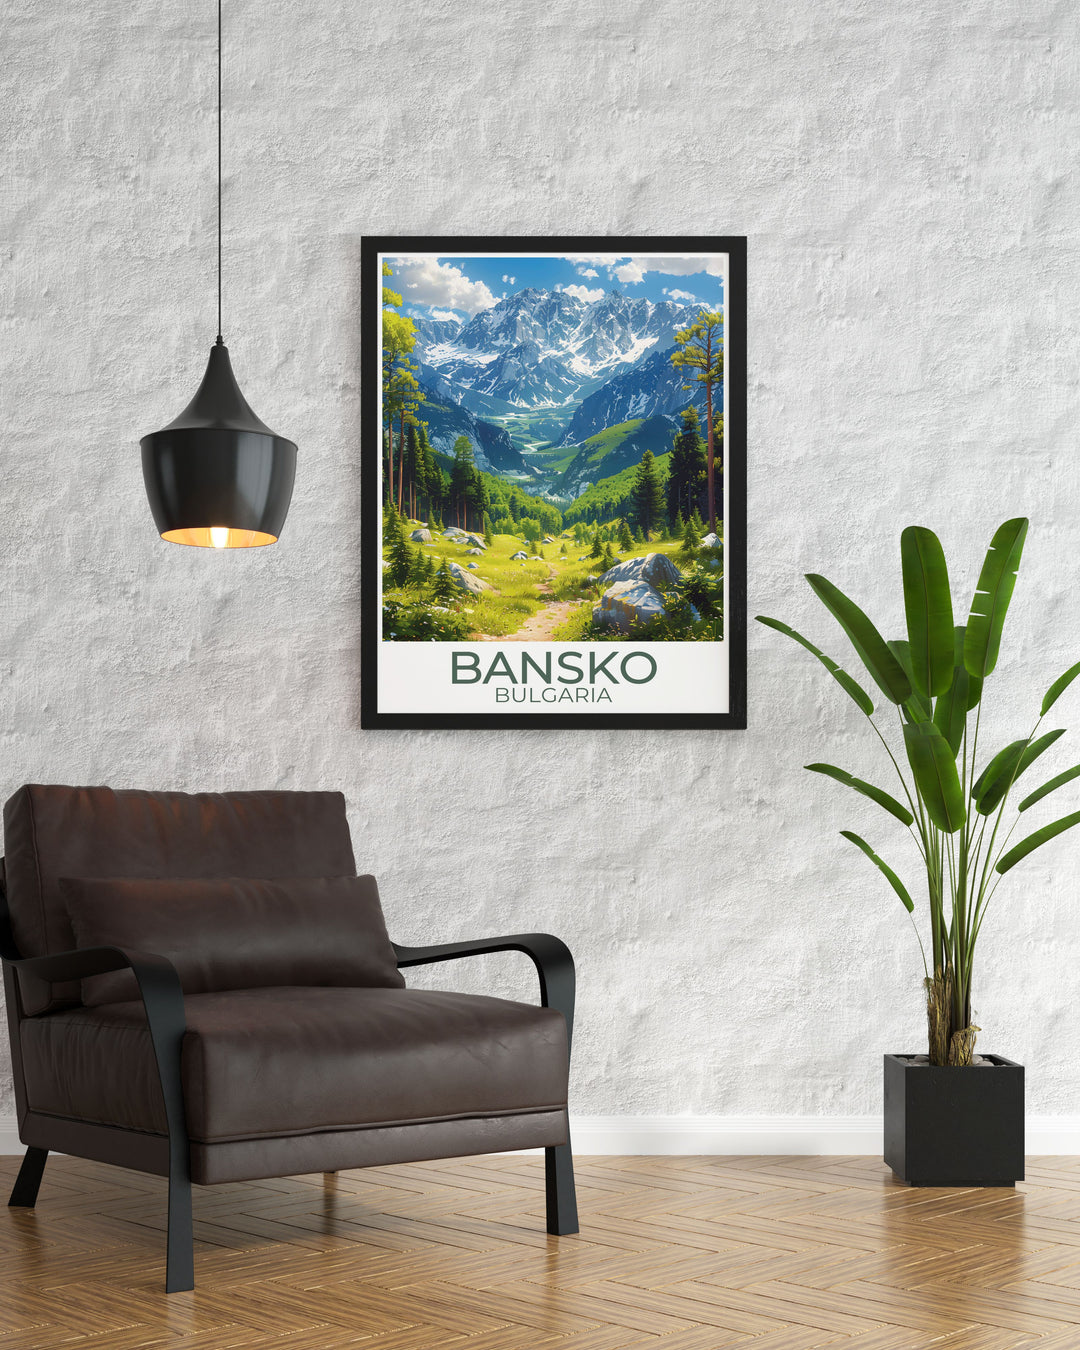 This vibrant travel poster showcases the breathtaking scenery of the Pirin Mountains and the modern amenities of Bansko Ski Resort, perfect for adding a touch of Bulgarias charm to your walls.